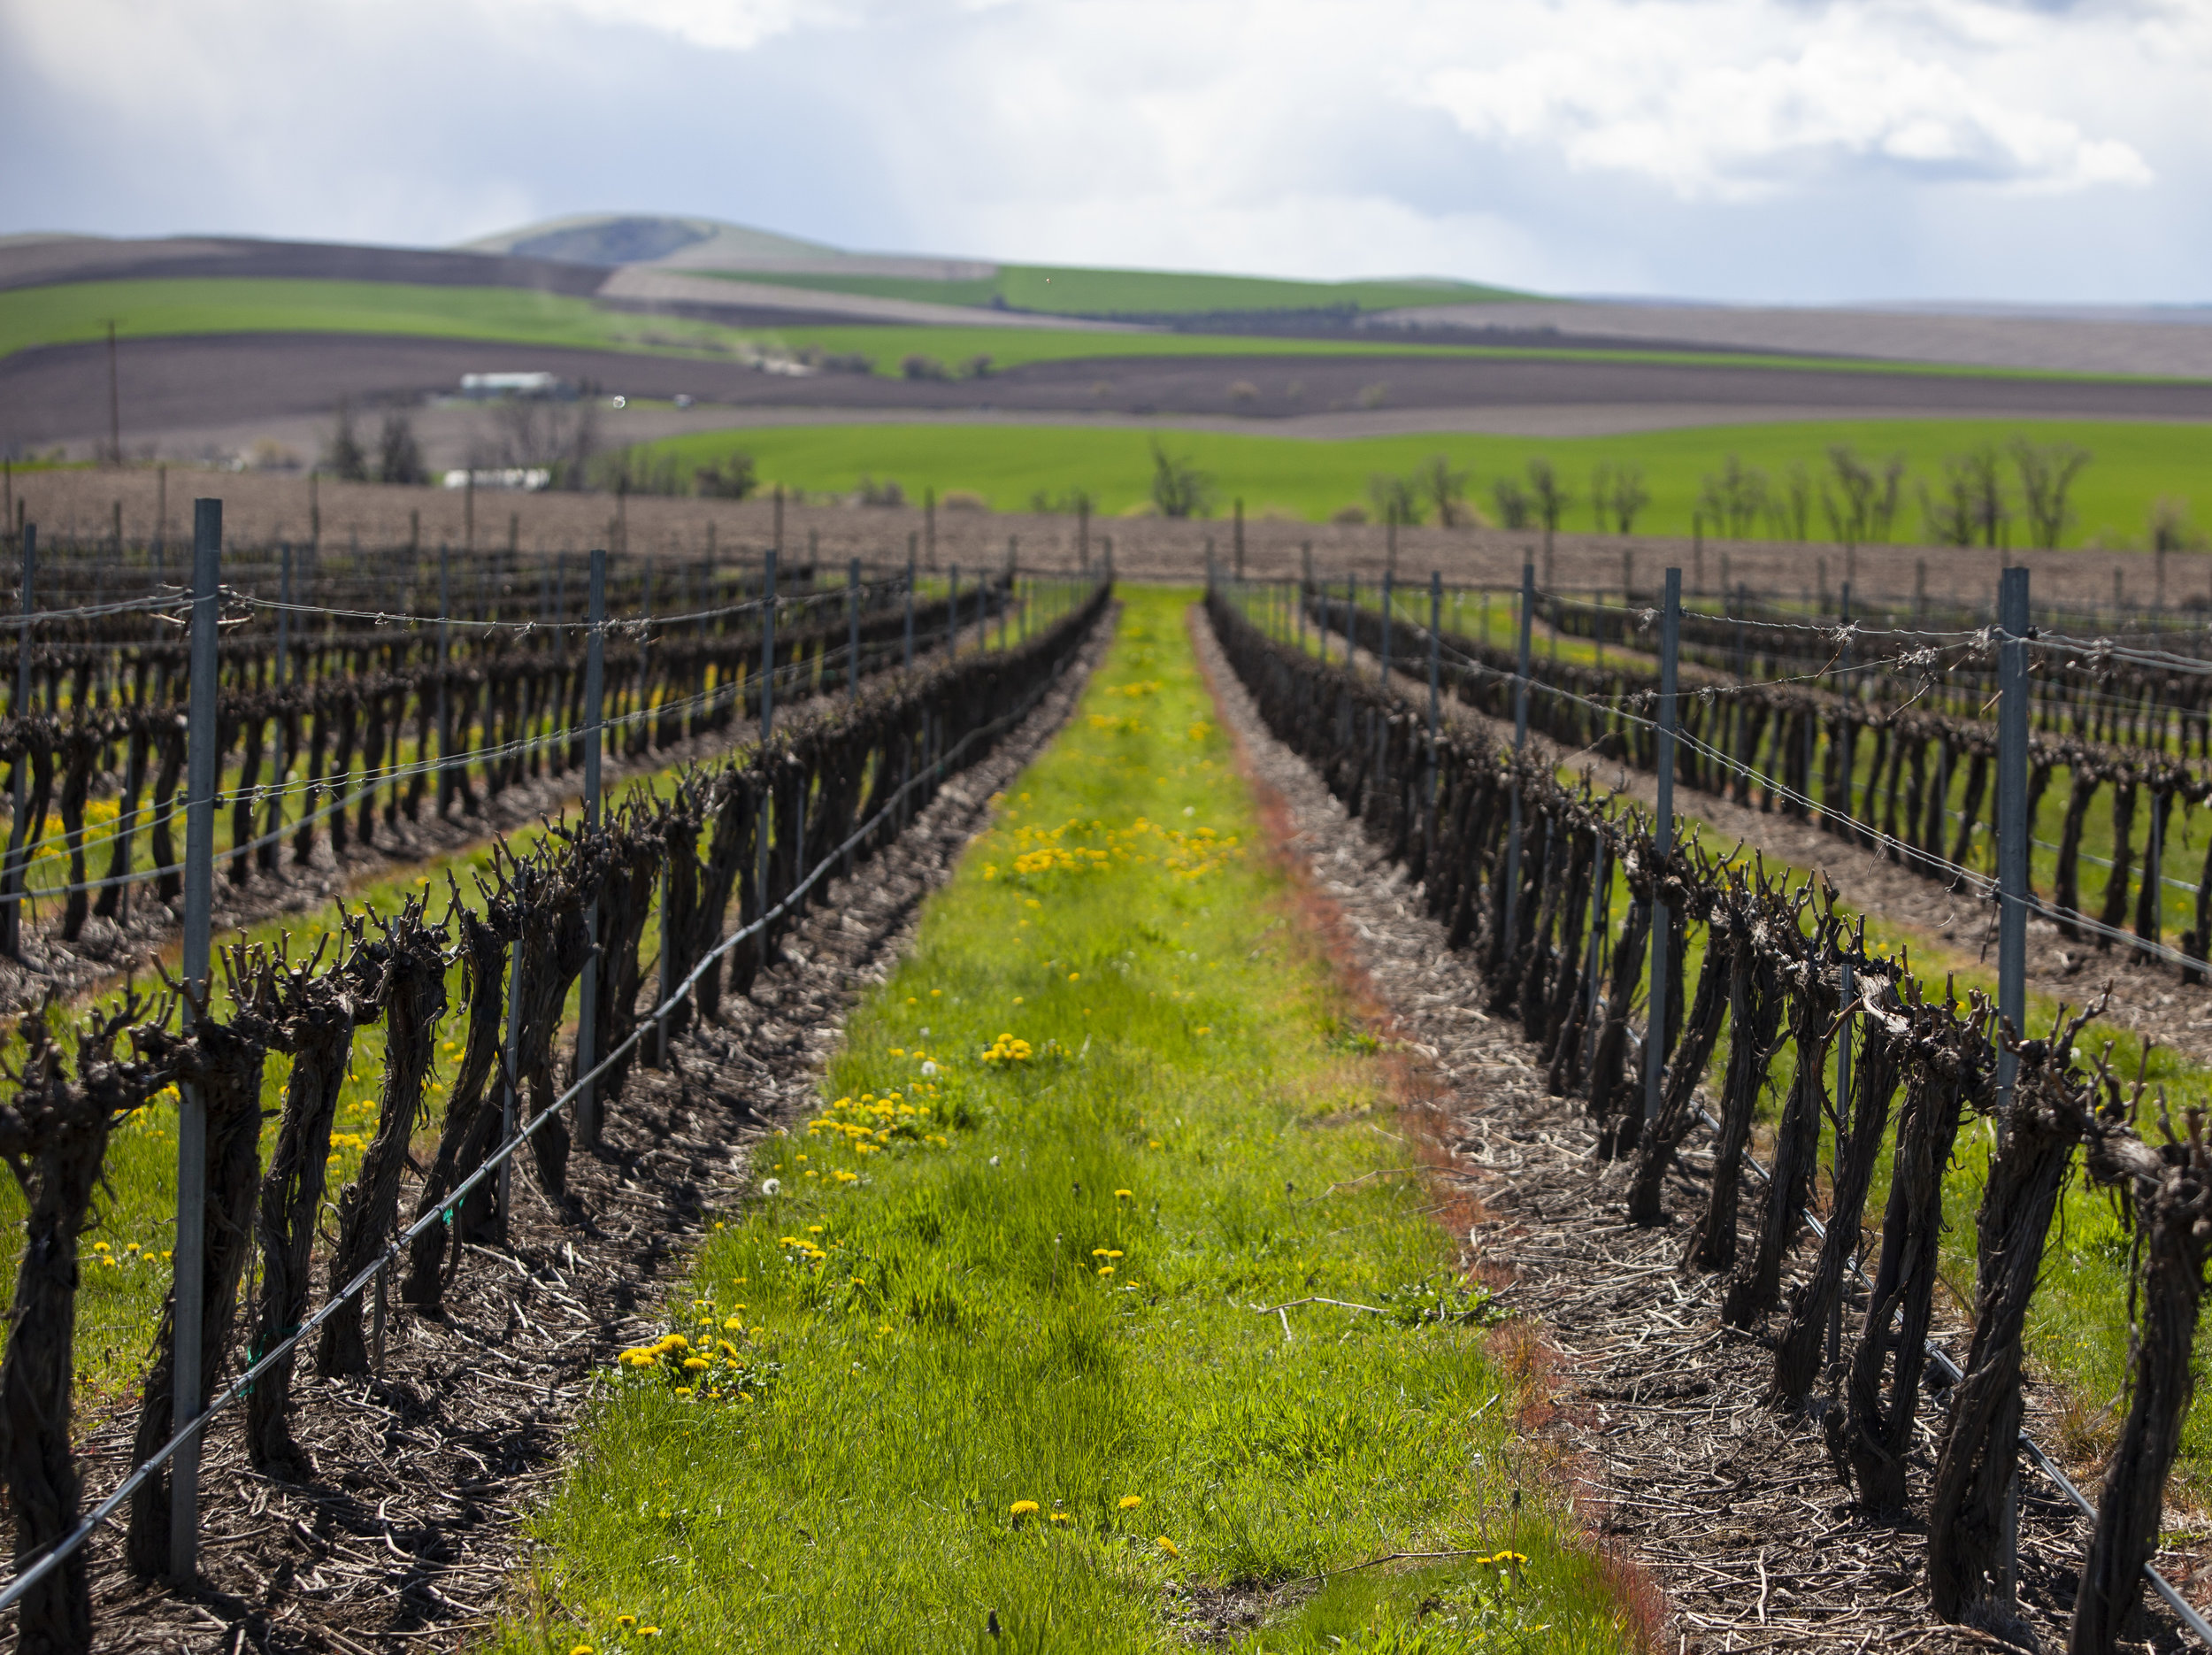 Les Collines vineyard as shoots emerge from the vines